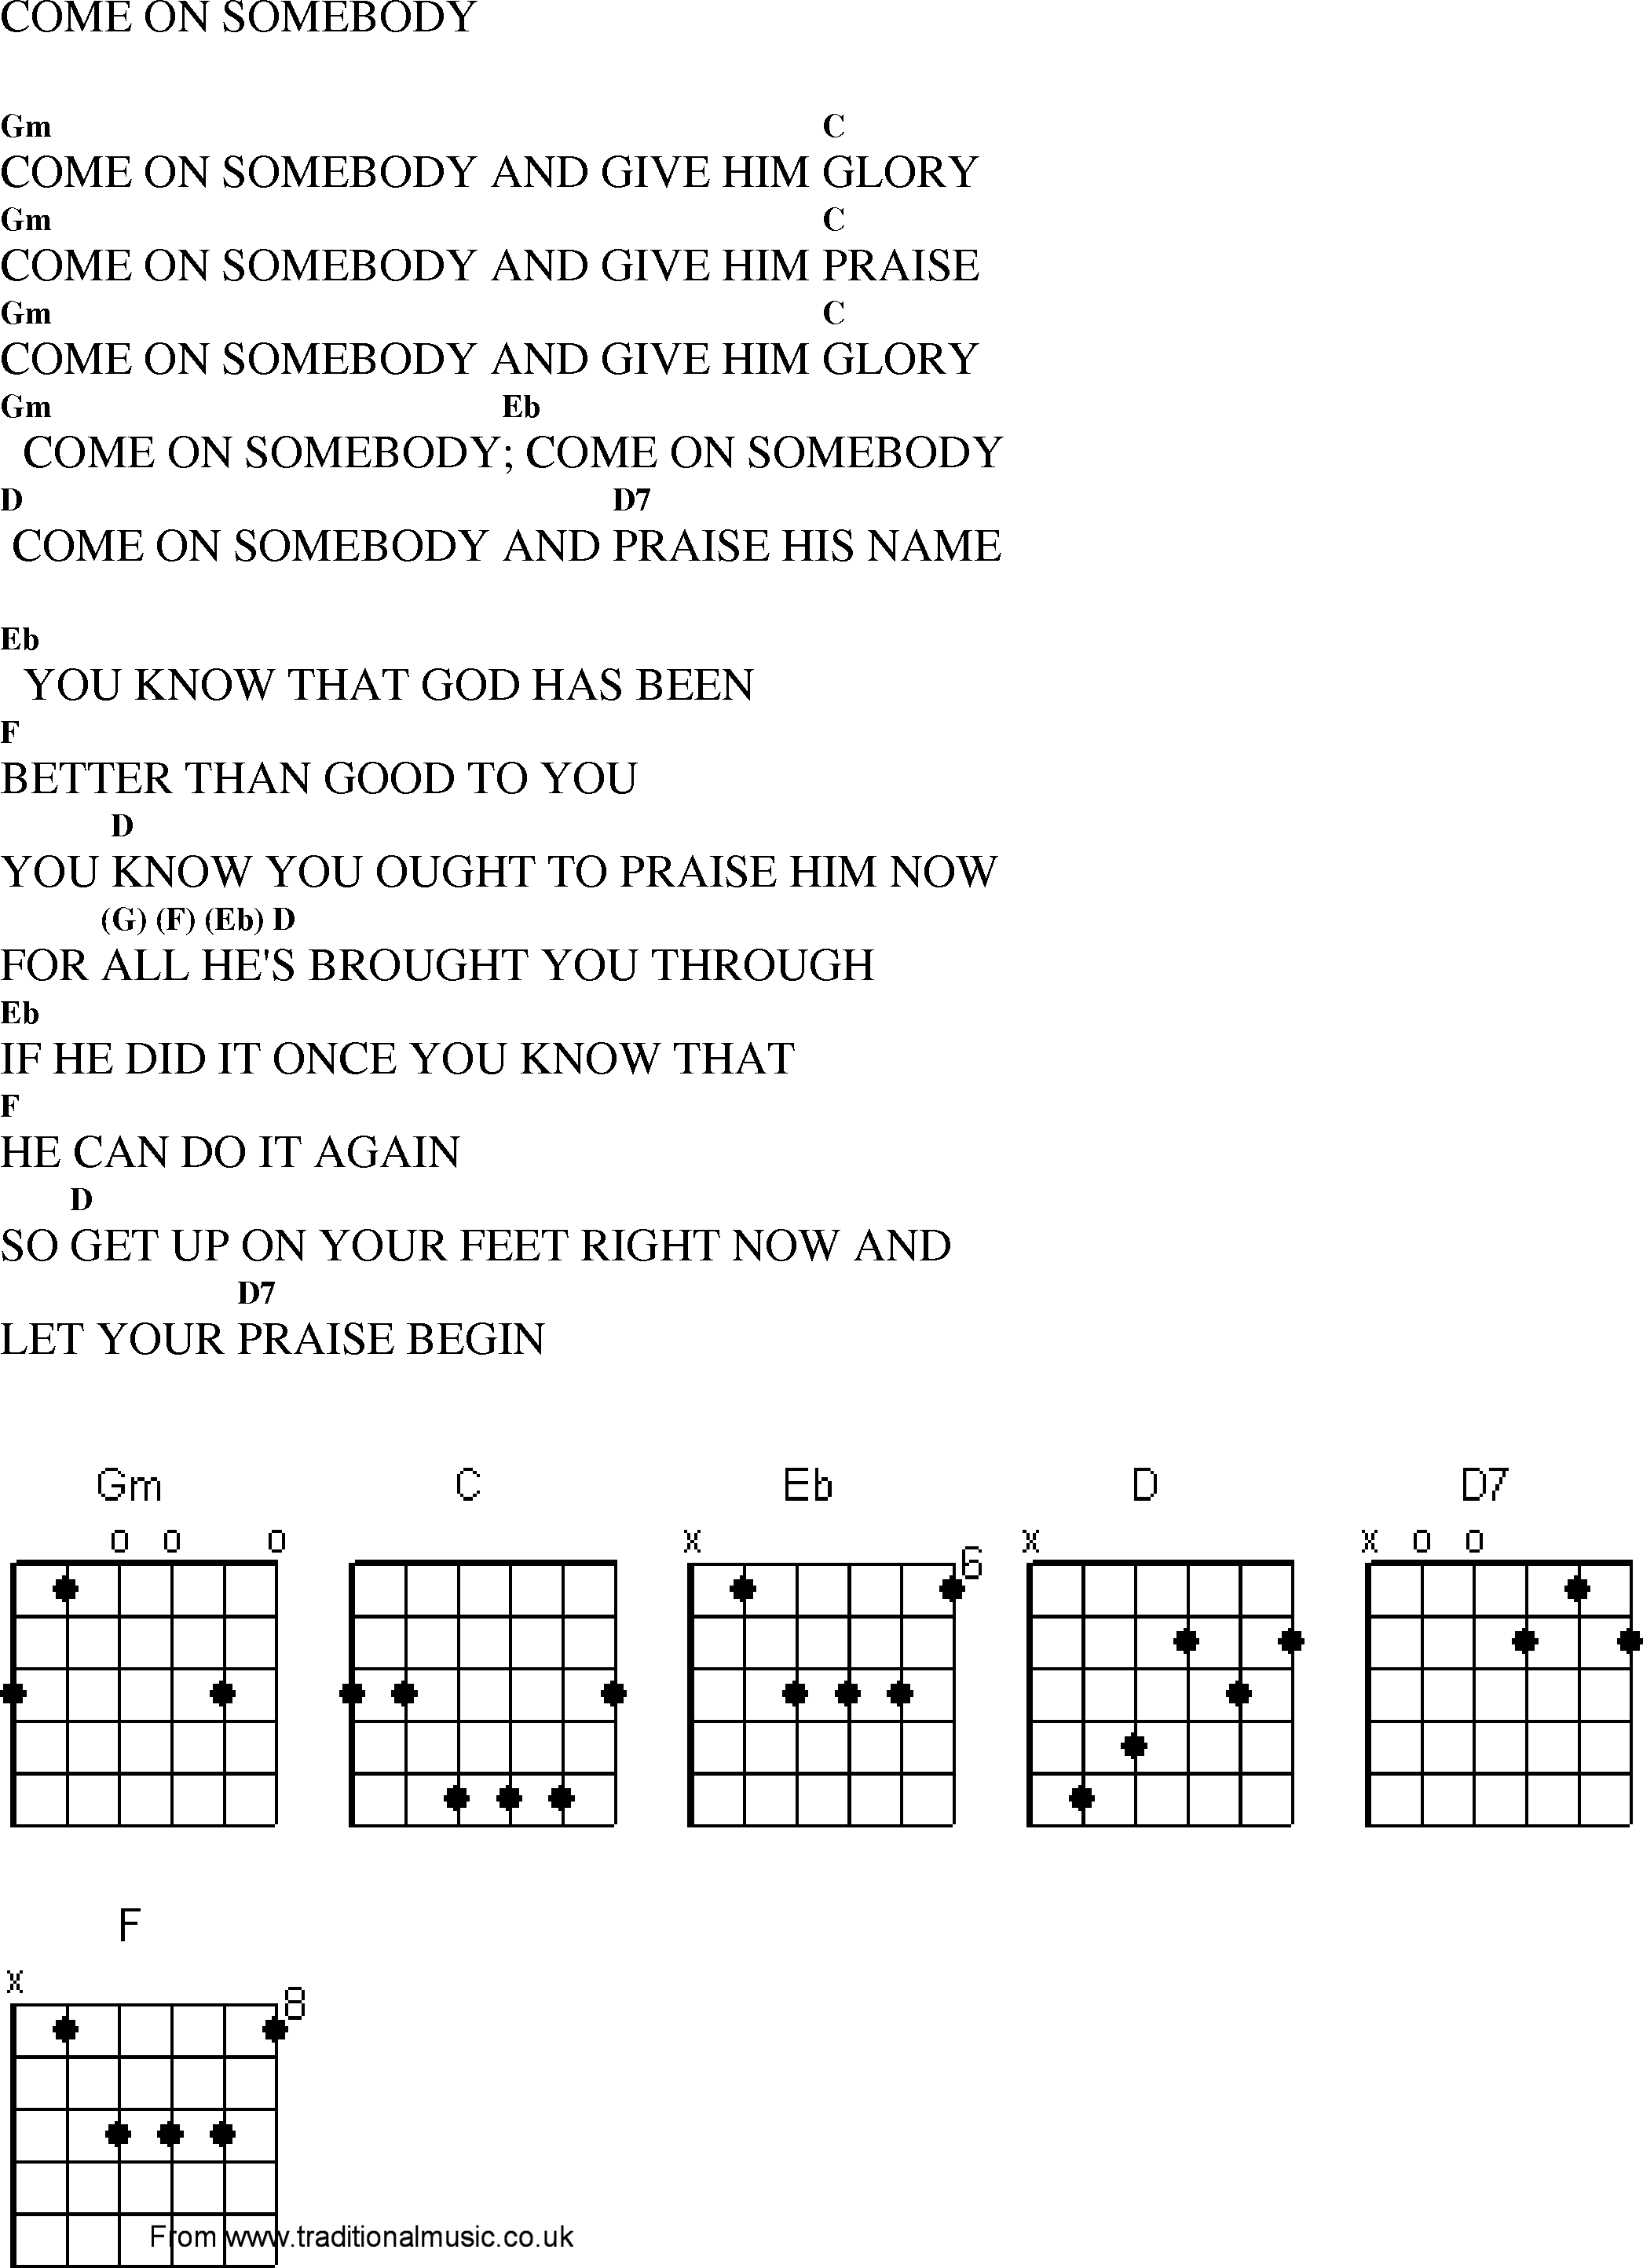 Gospel Song: come_on_somebody, lyrics and chords.